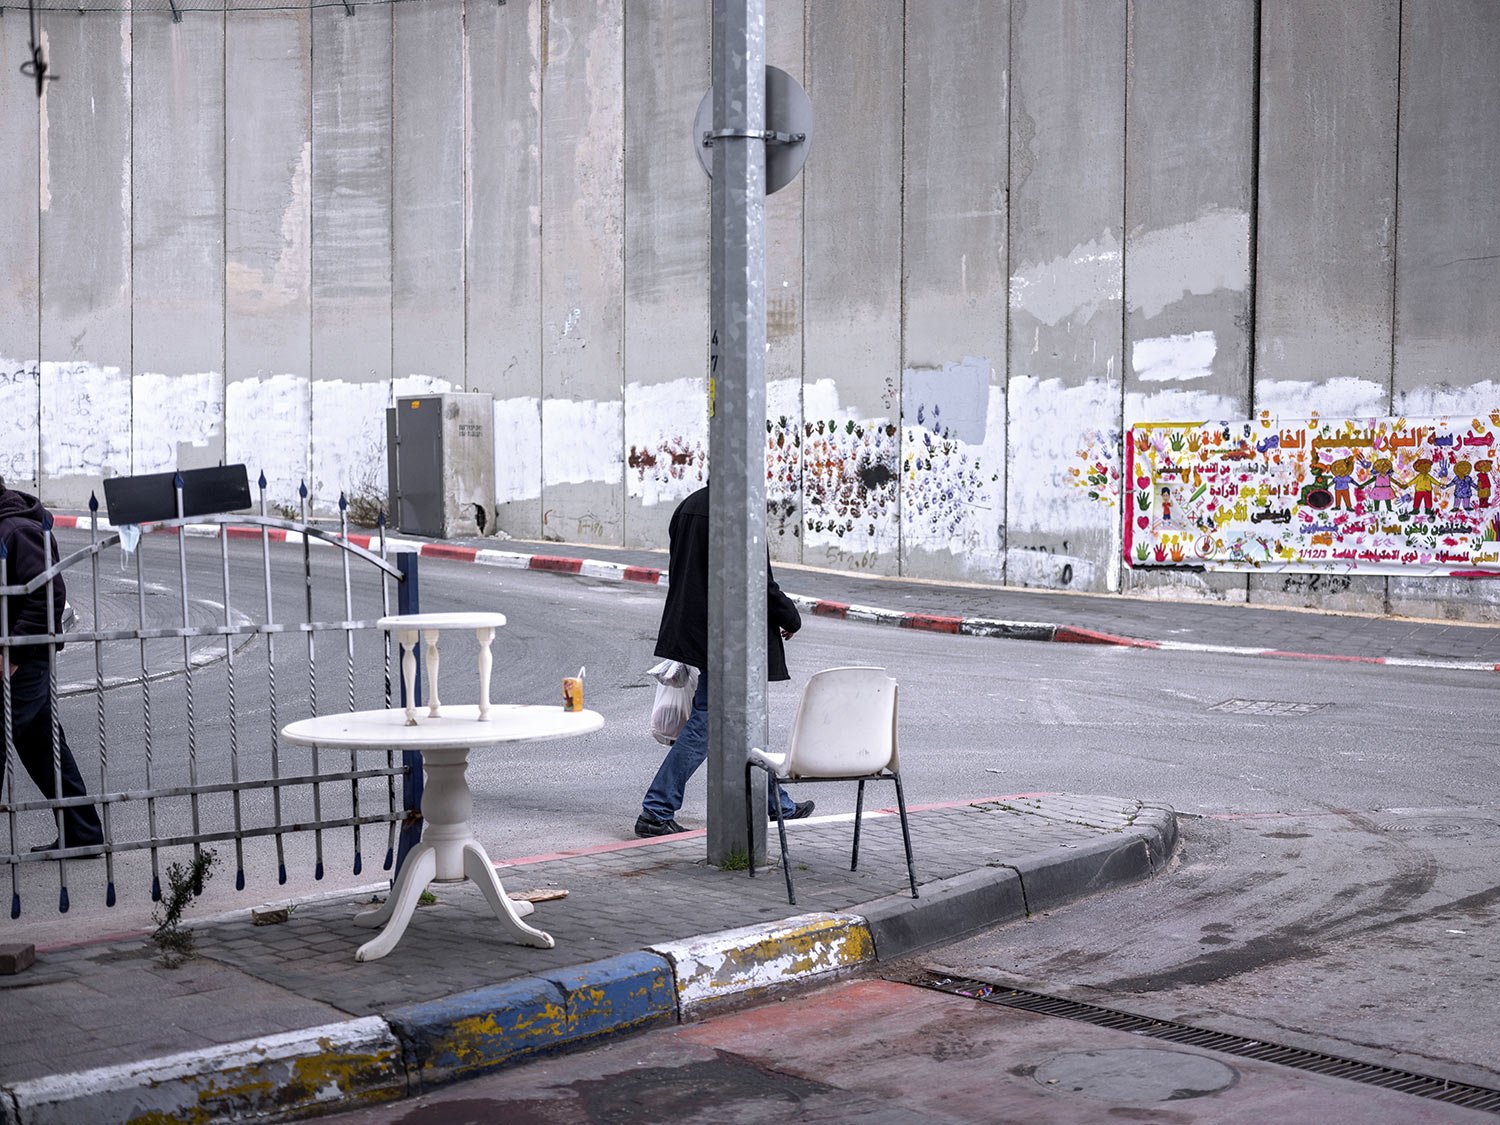  Palestinians walk by a section of the Israeli separation barrier in the West Bank village of Abu Dis on the outskirts of Jerusalem, Jan. 31, 2022. (AP Photo/Oded Balilty) 